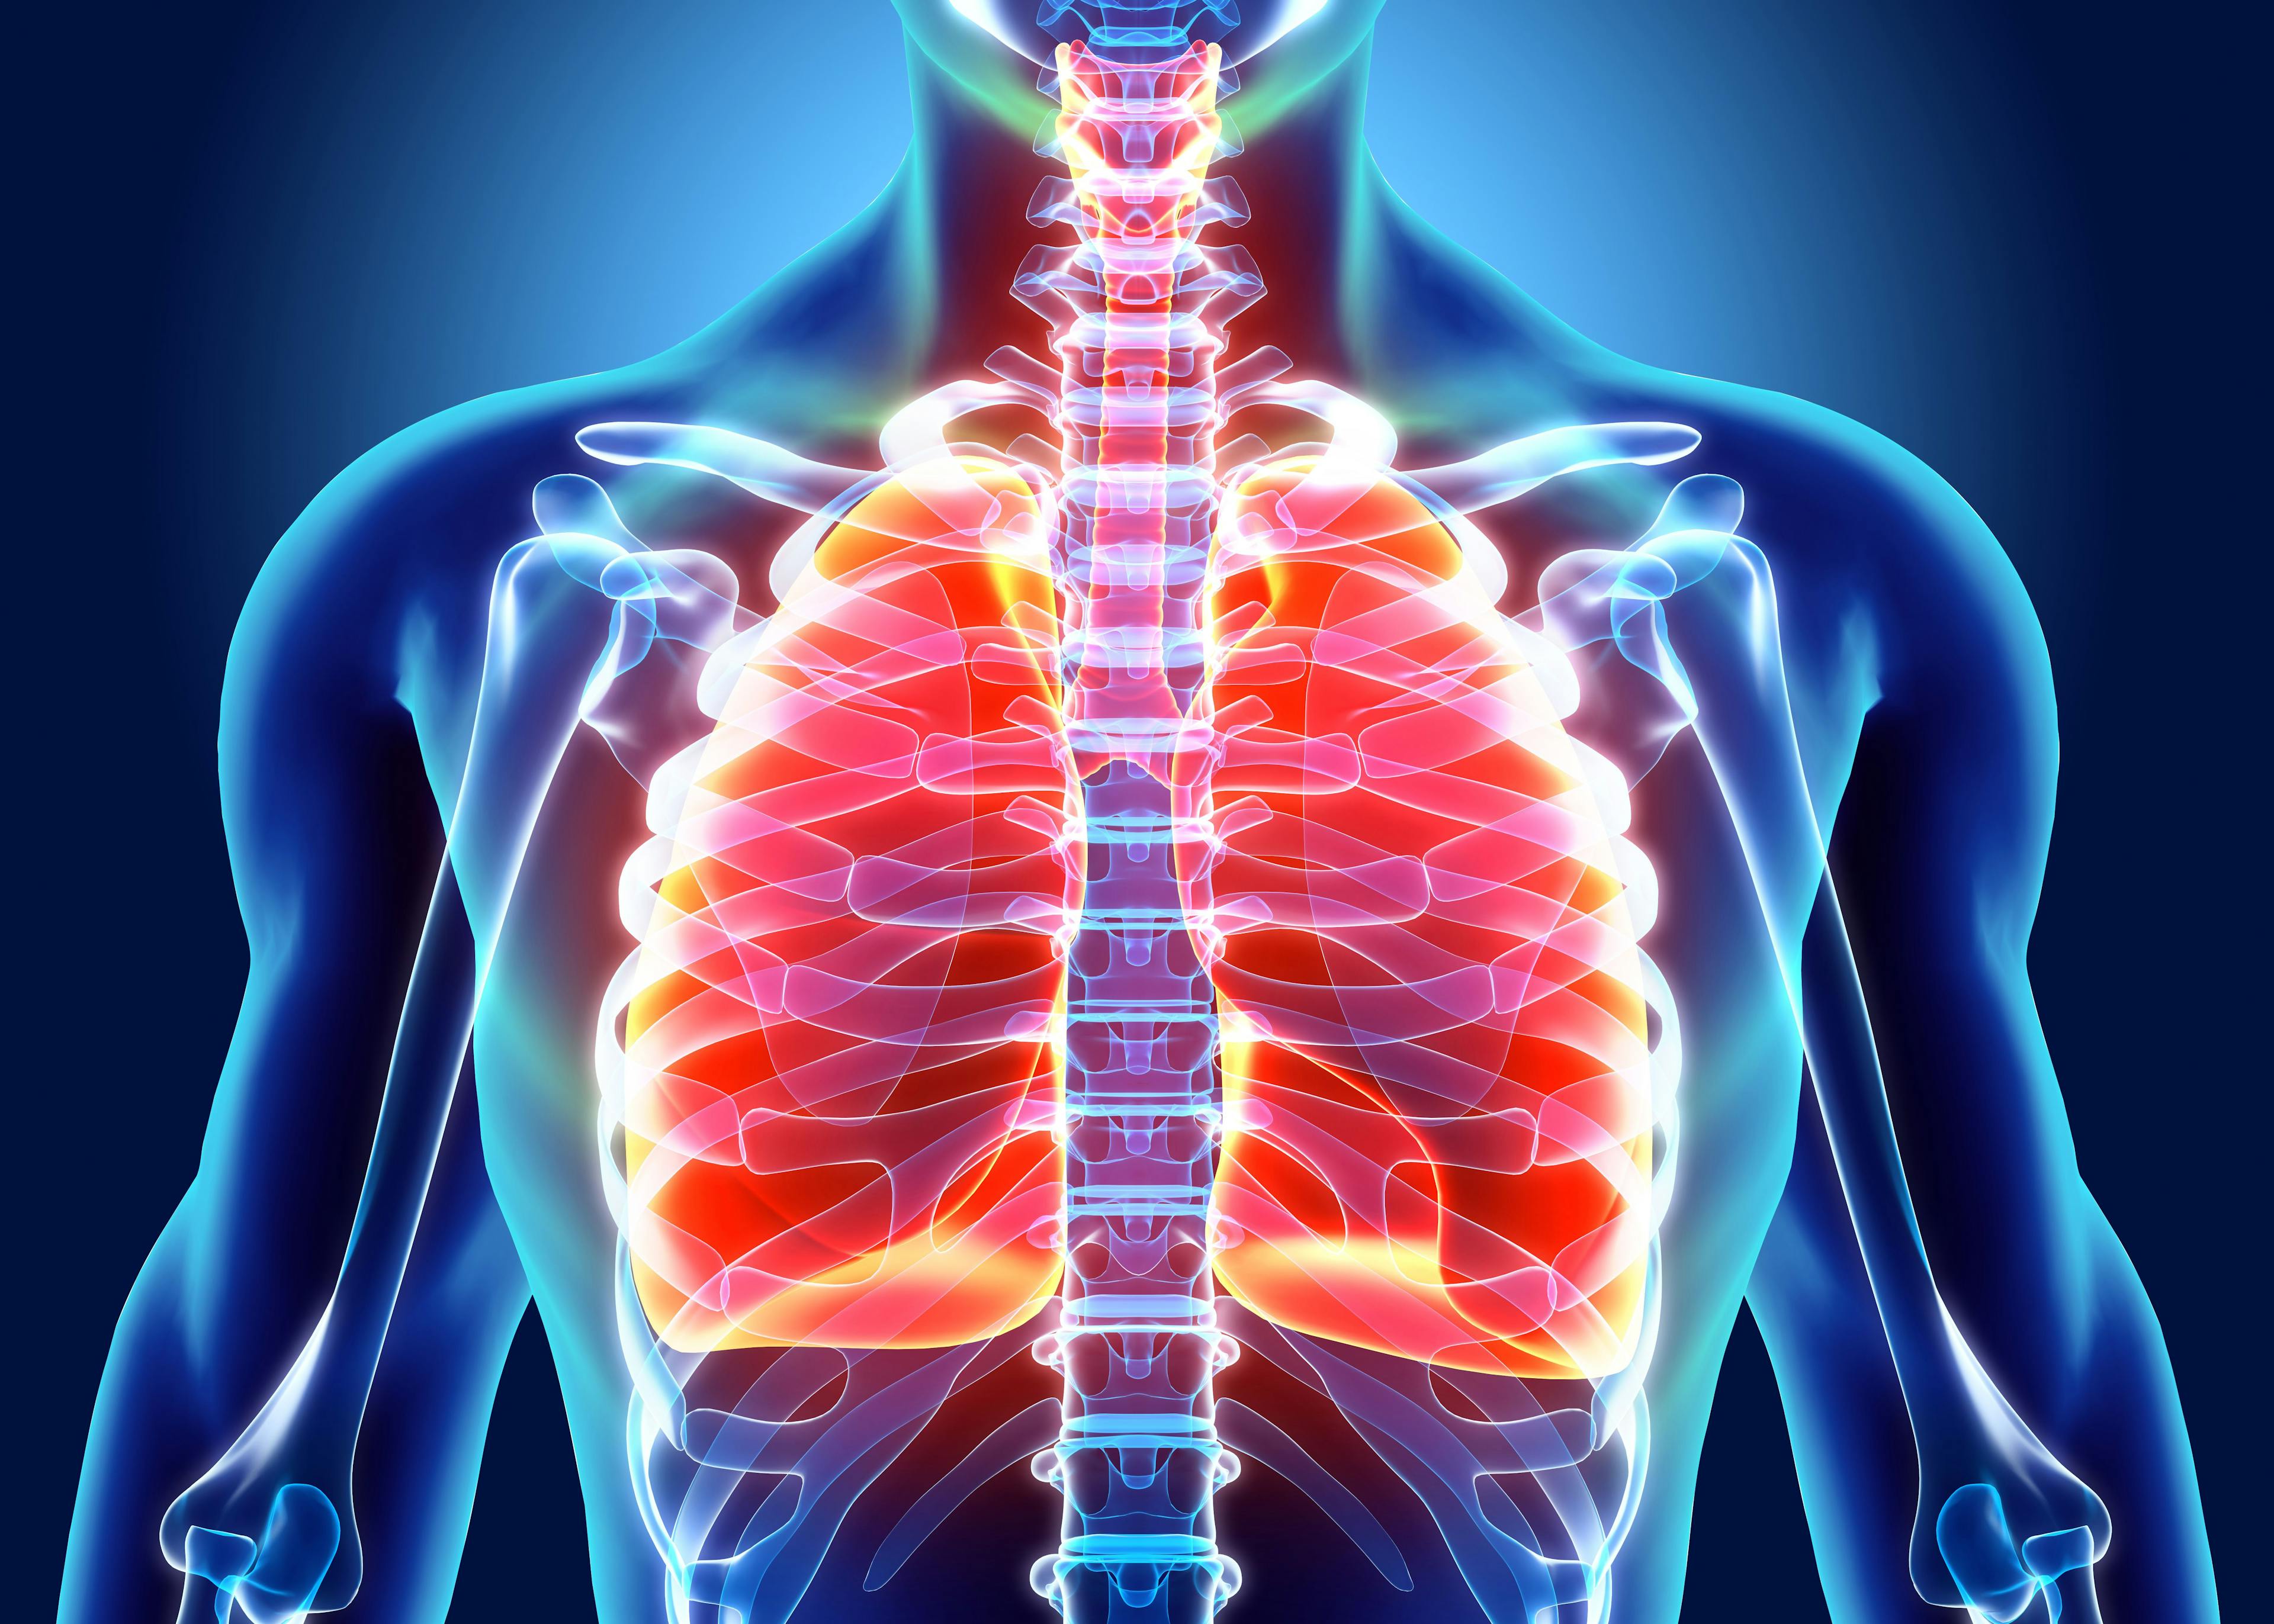 Patients With Hidradenitis Suppurativa Have Increased Odds of Respiratory Disease, According to Study Findings